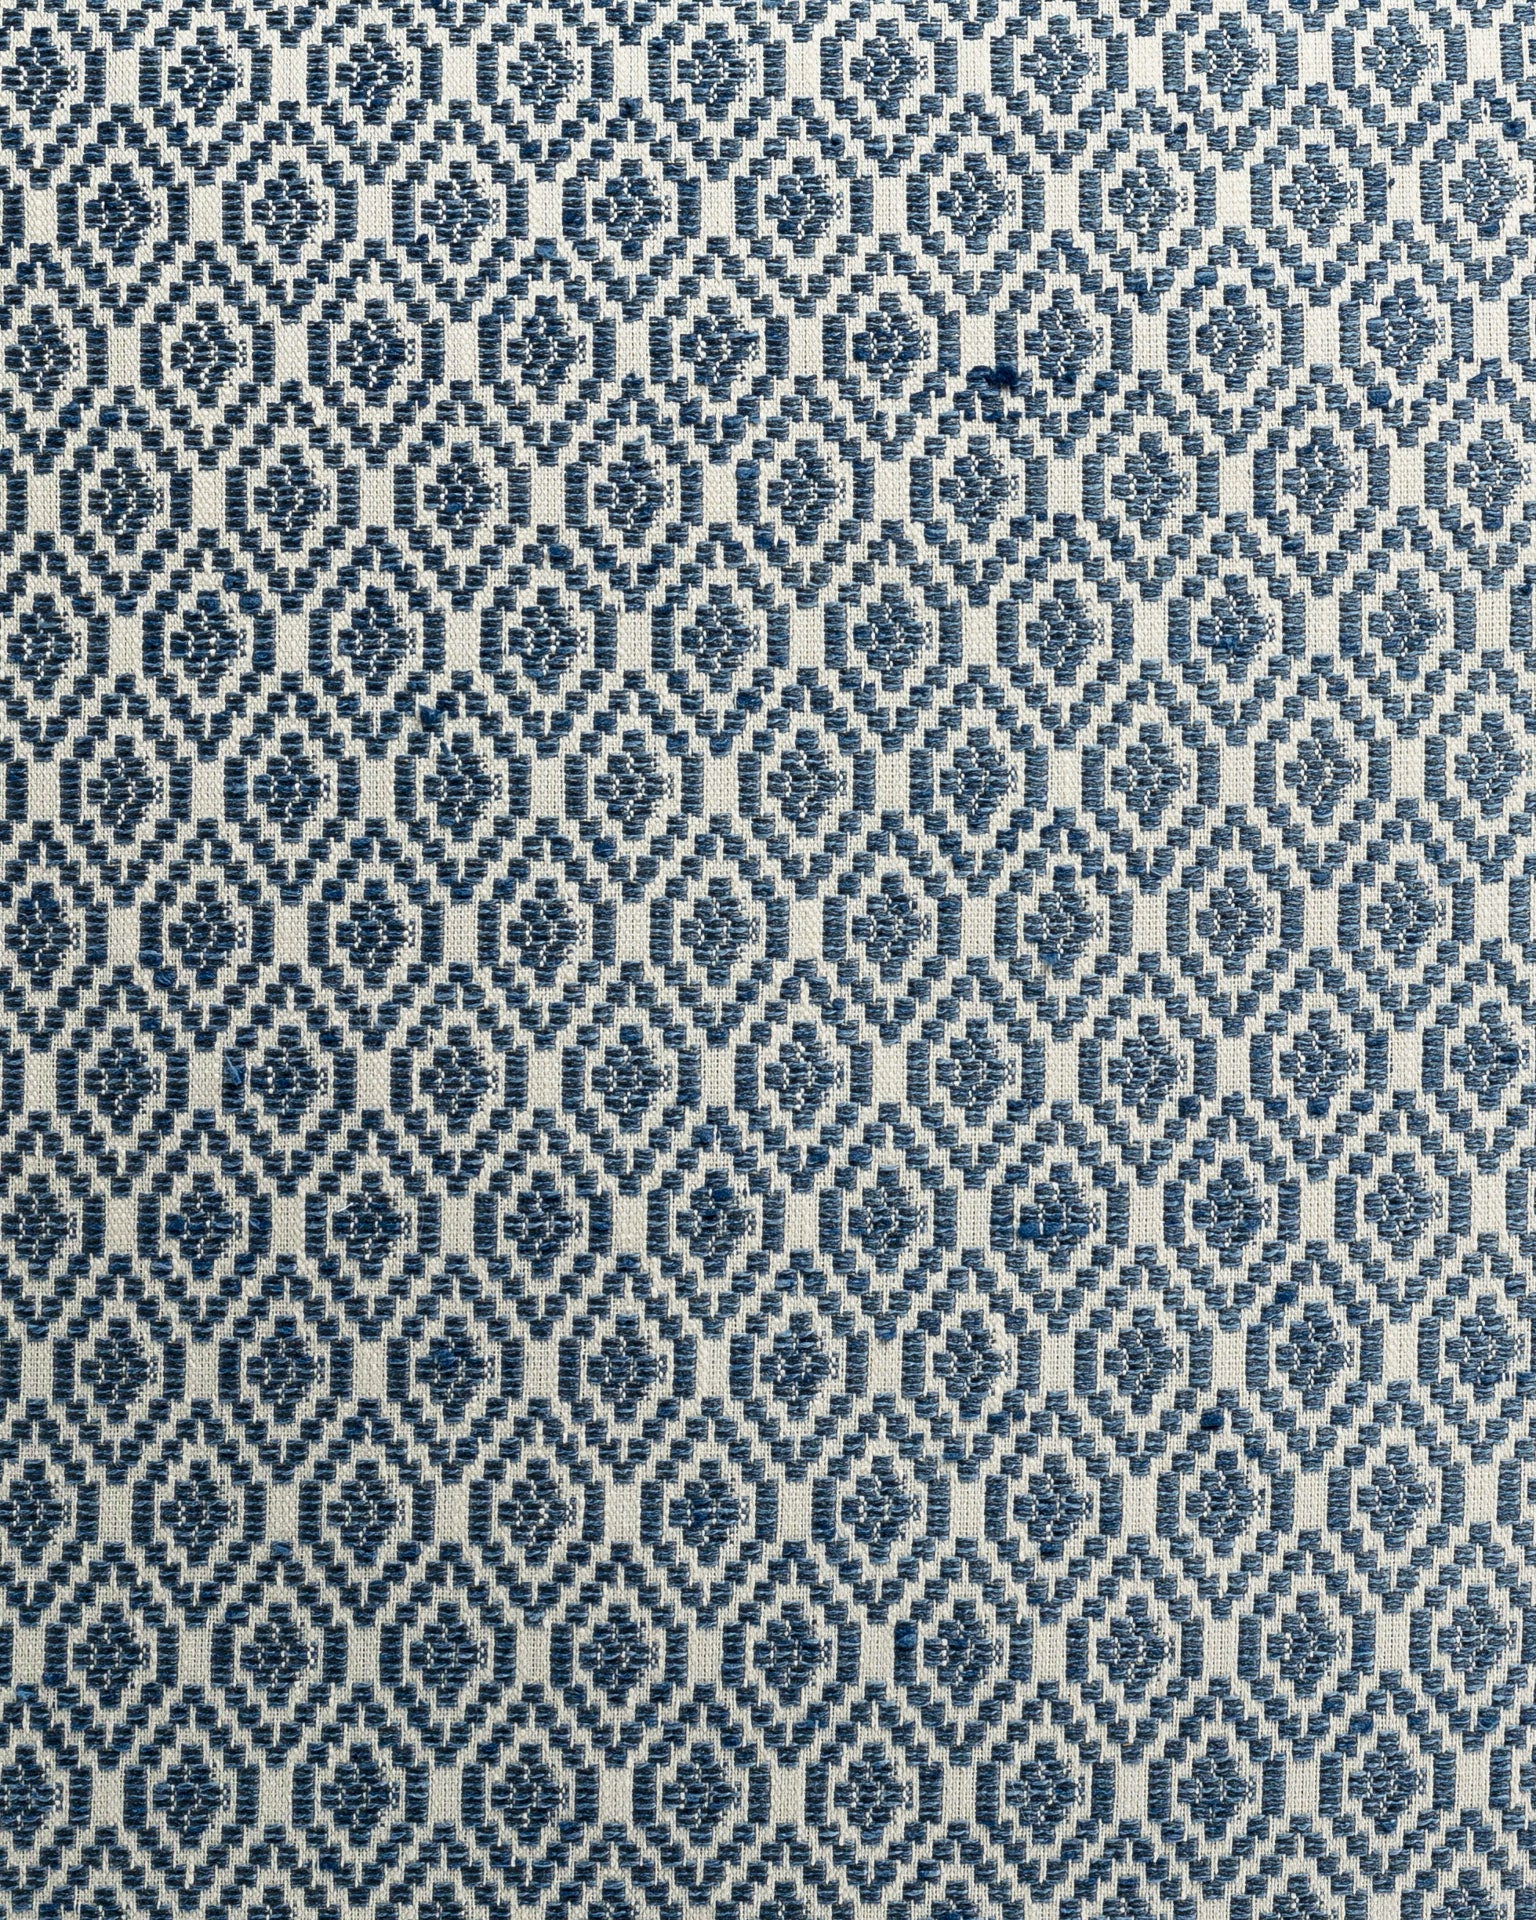 A close-up of a fabric with a repetitive geometric pattern in shades of blue and white.